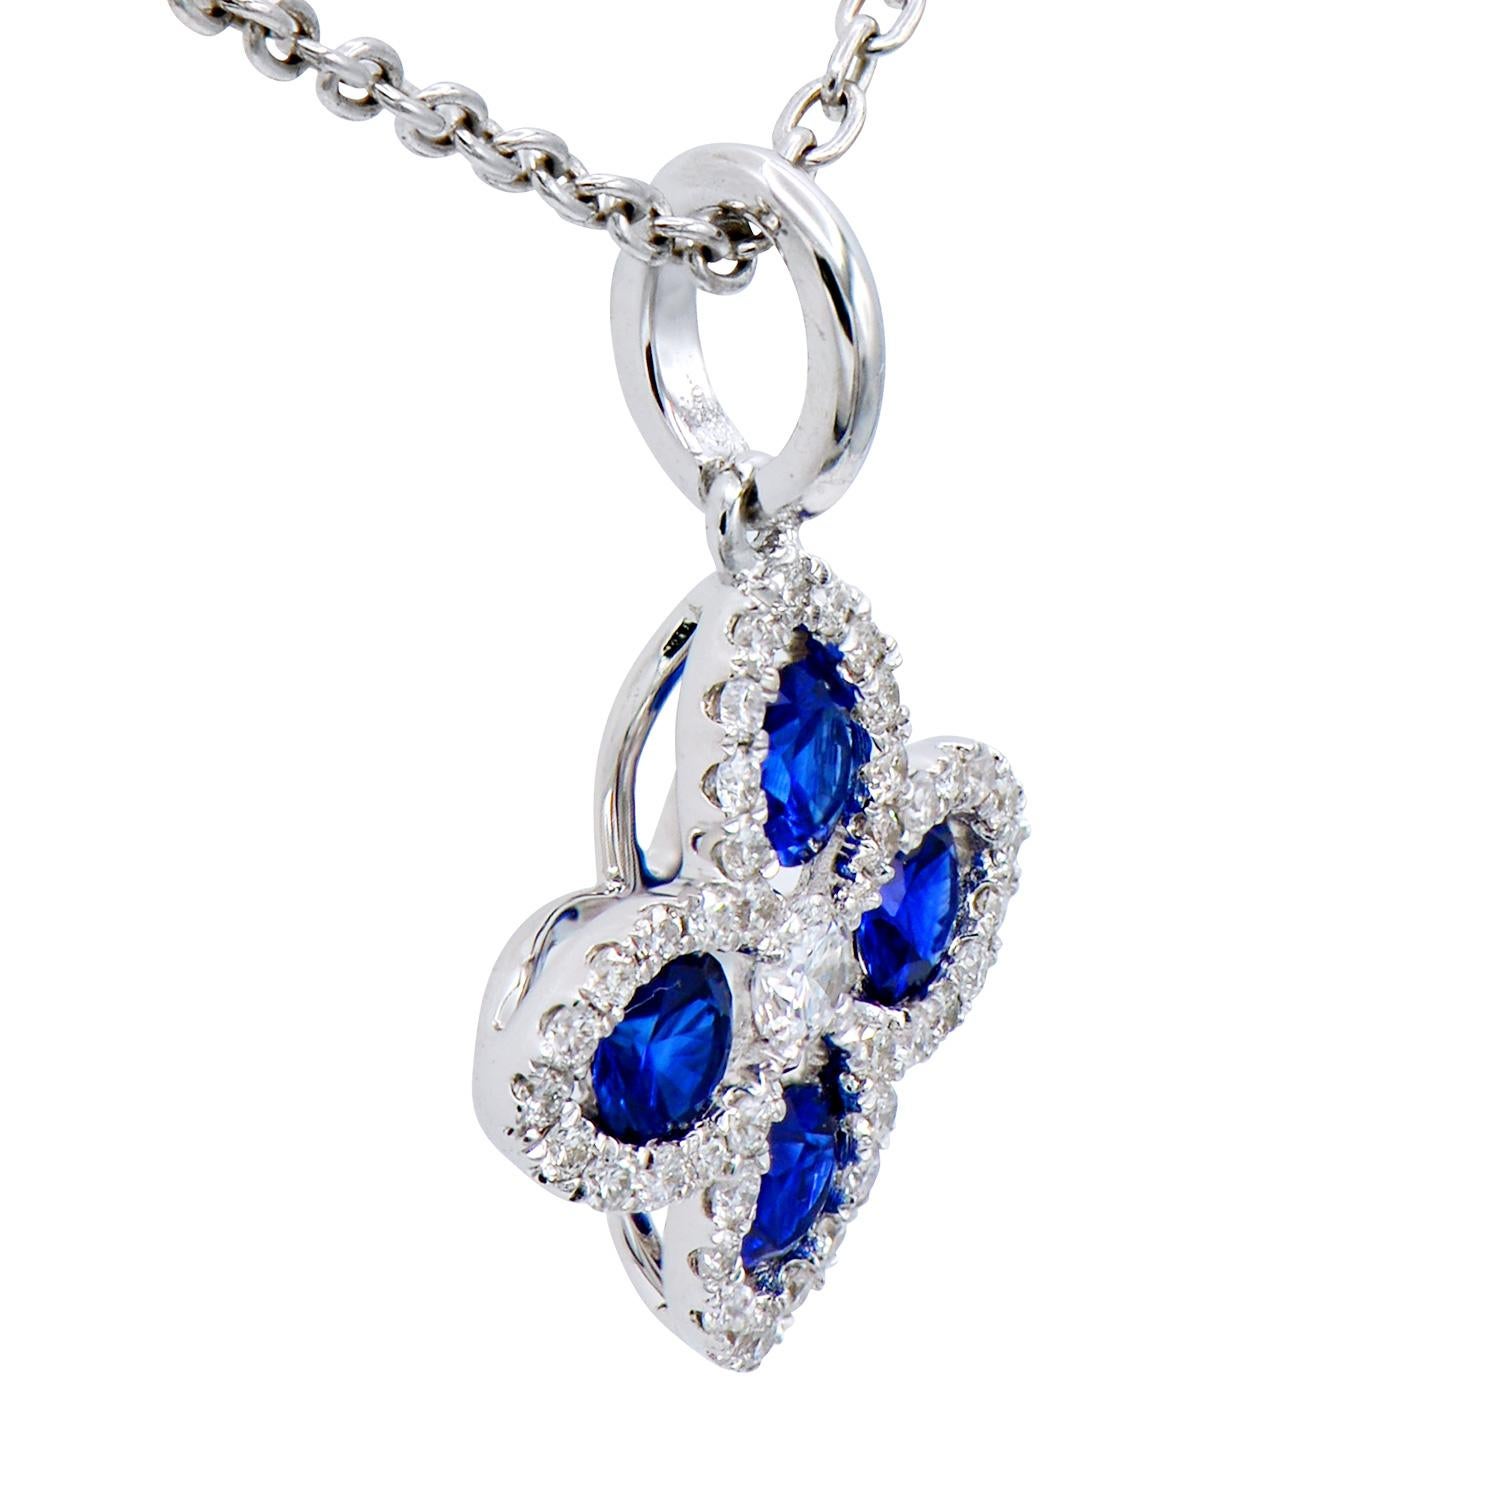 This beautiful pendant is made from 4 sapphires totaling 0.35 carats which are surrounded by 41 round VS2, G color diamonds totaling 0.13 carats. Together they form a lovely flower or four-leaf shape that is very classic and timeless. The pendant is